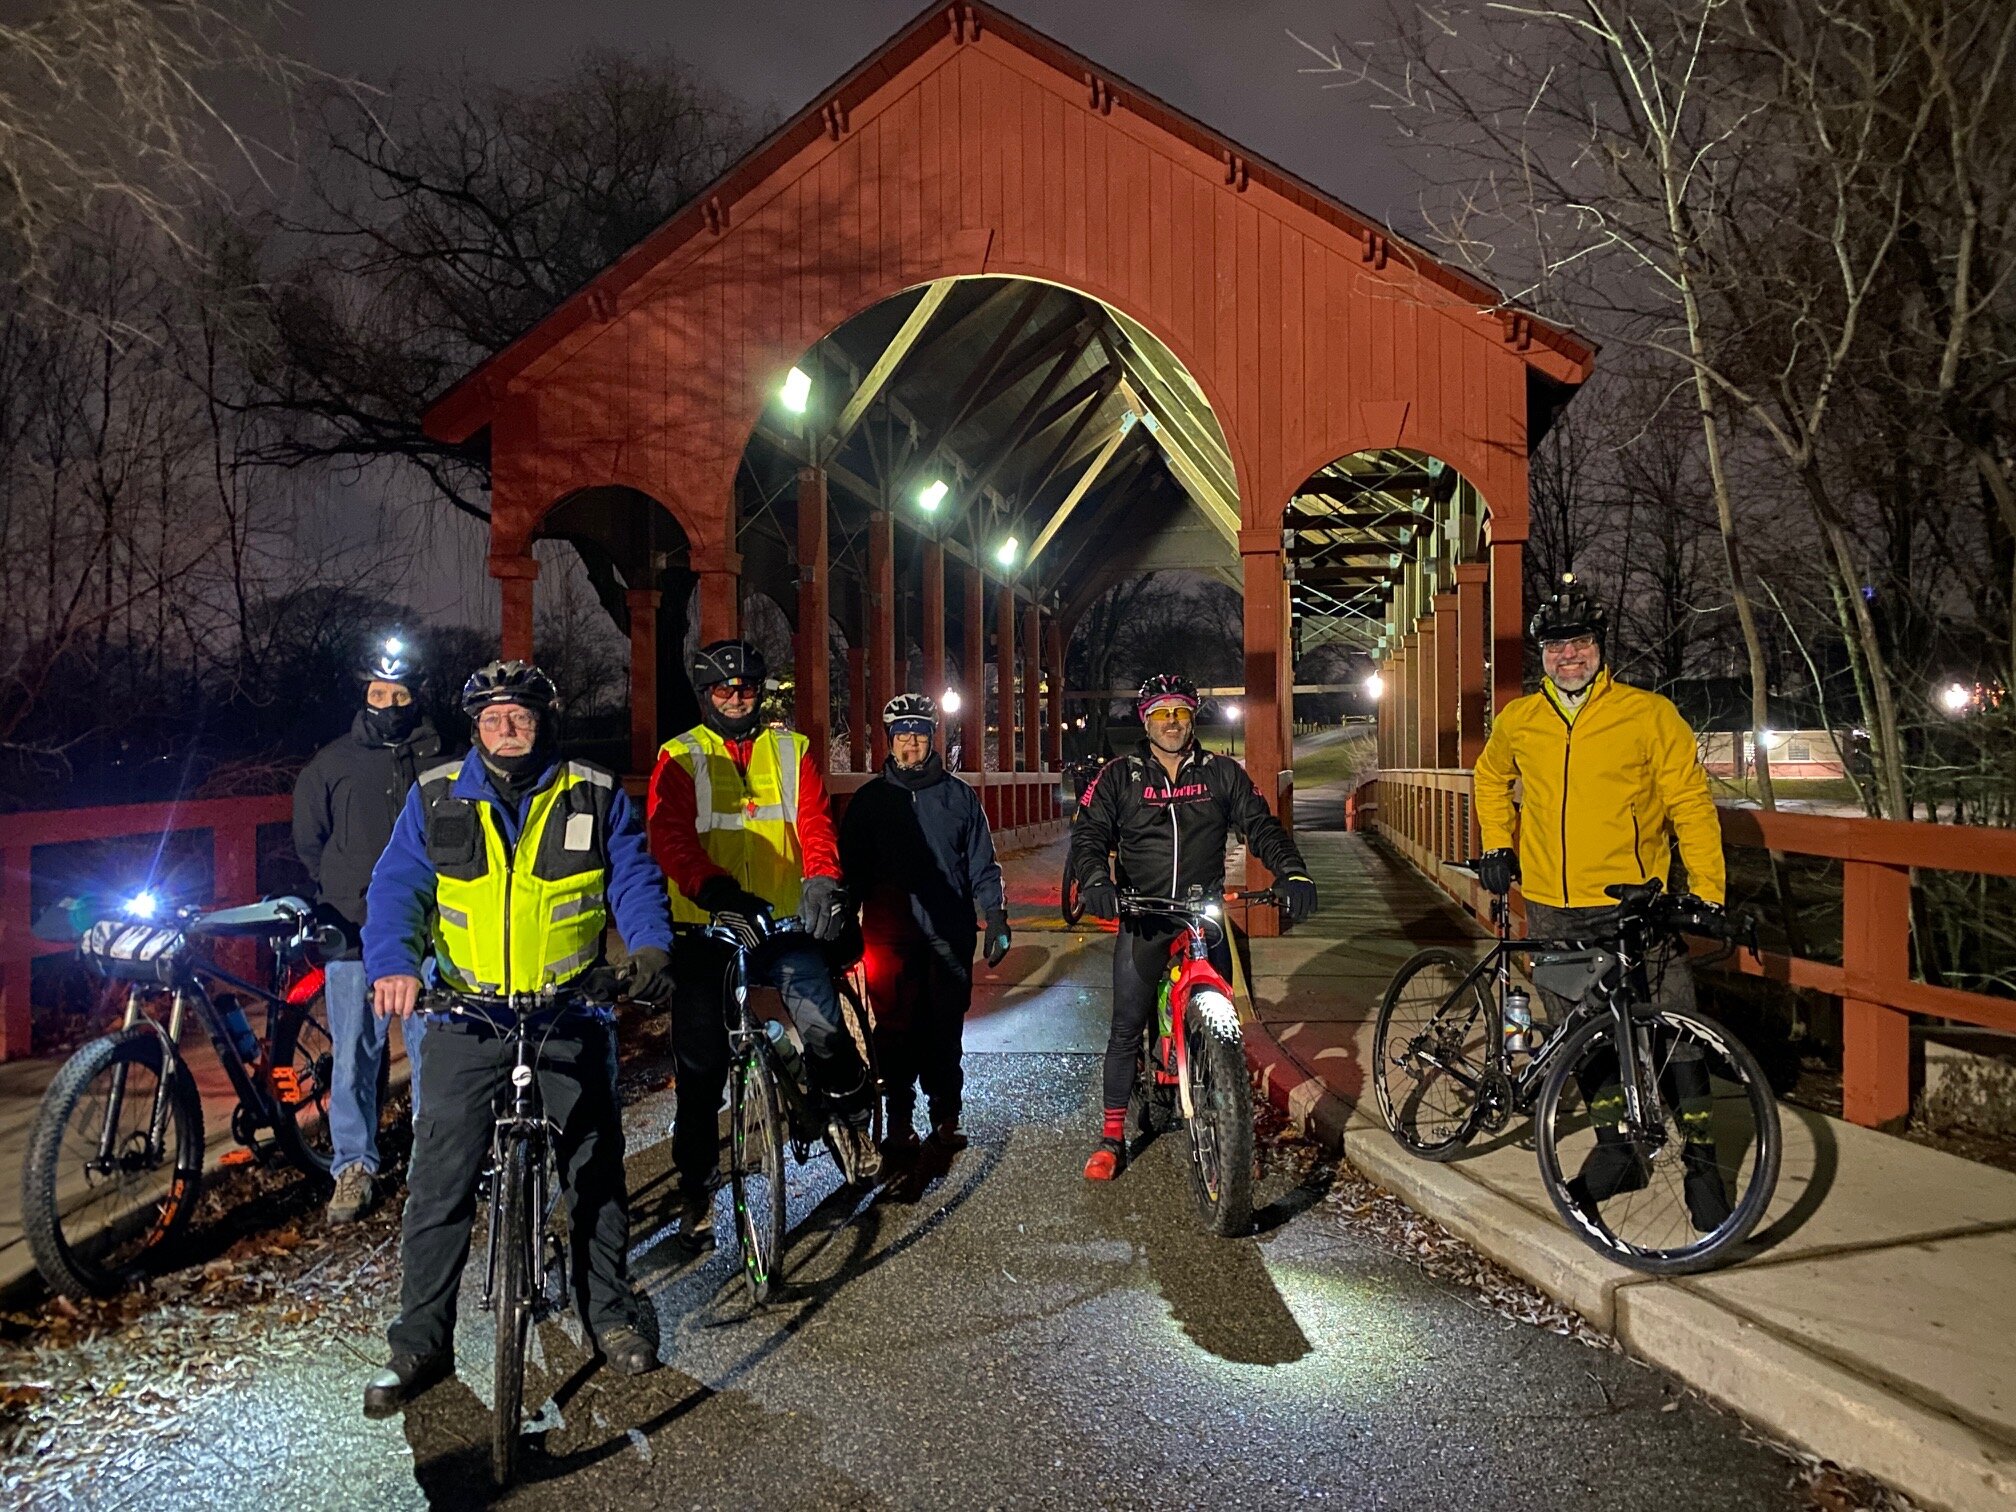 Bike Dearborn’s Weekly Winter Wednesdays event gathers the most dedicated of area cyclists each week for a 10- to 12-mile bike ride around Dearborn.